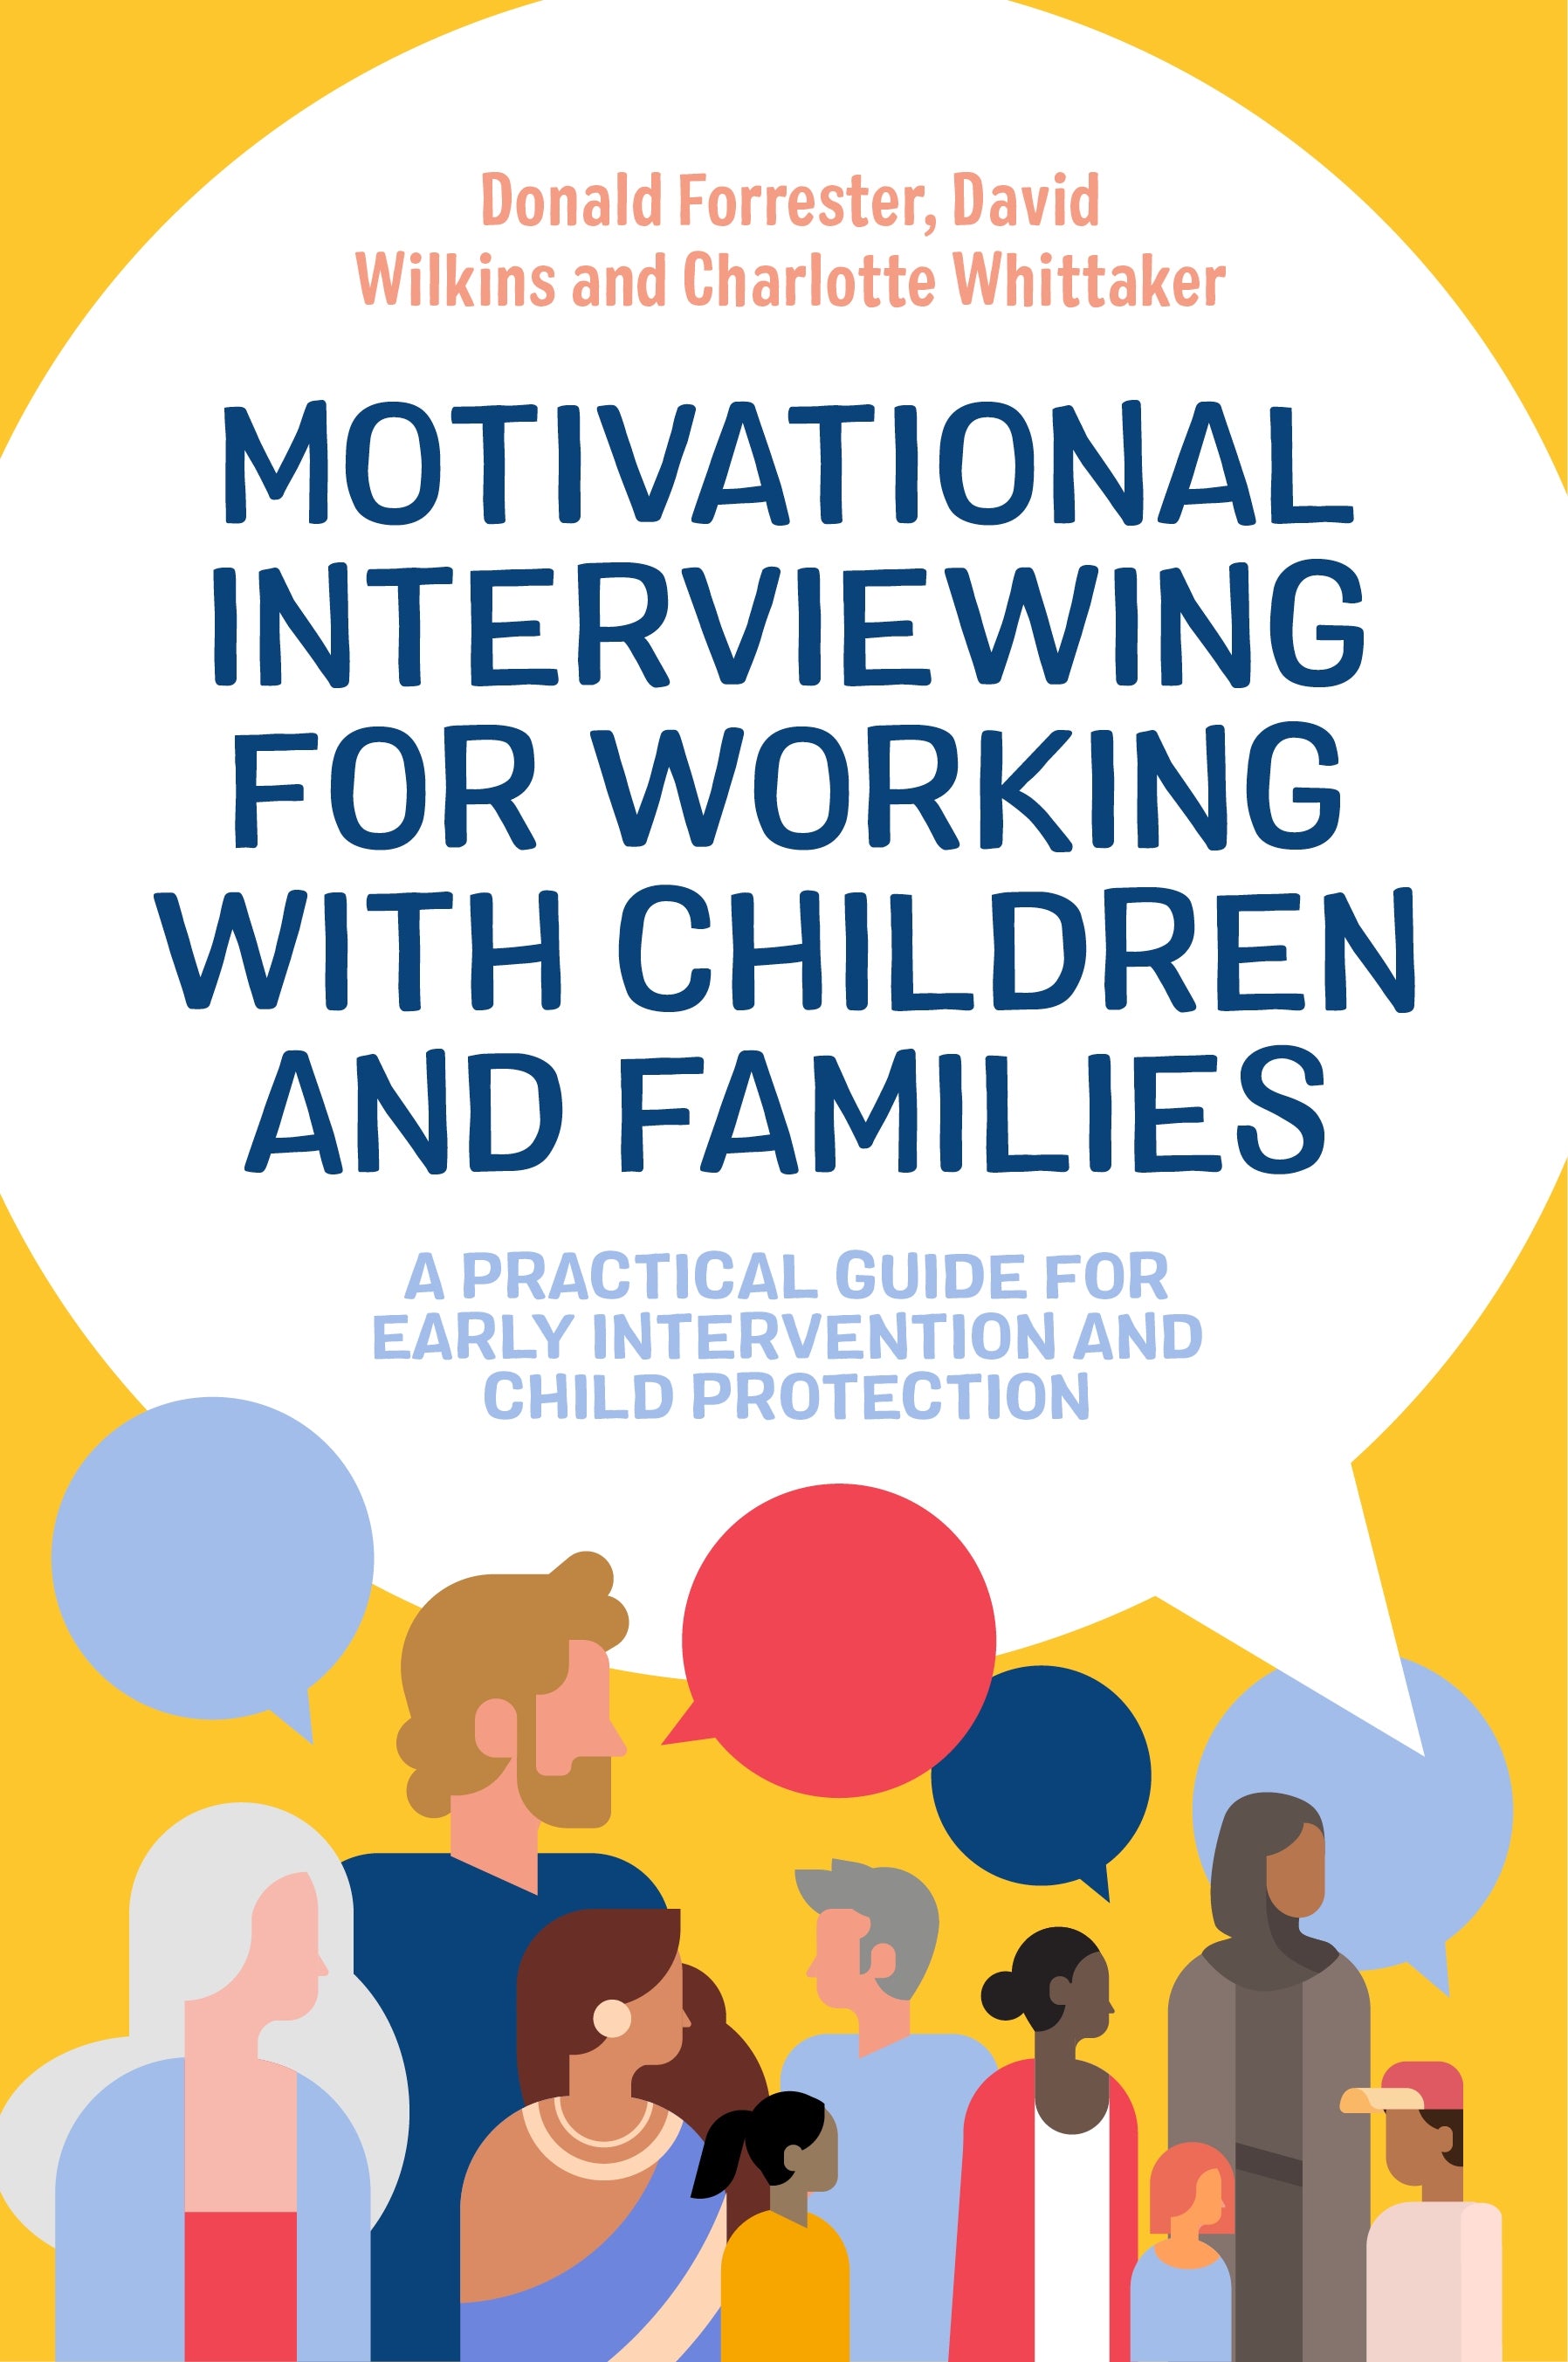 Motivational Interviewing for Working with Children and Families by Donald Forrester, David Wilkins, Charlotte Whittaker